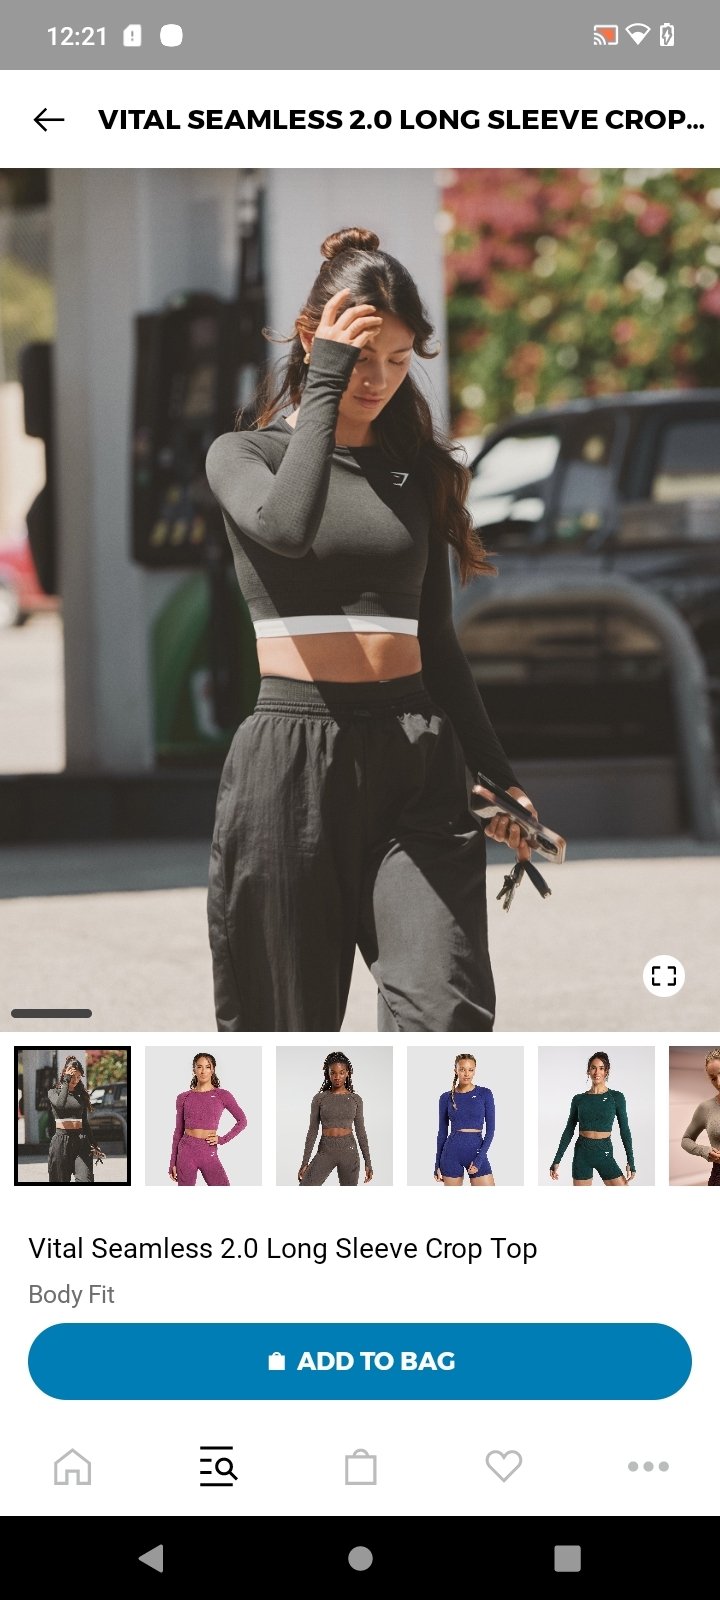 Gymshark APK Download for Android Free